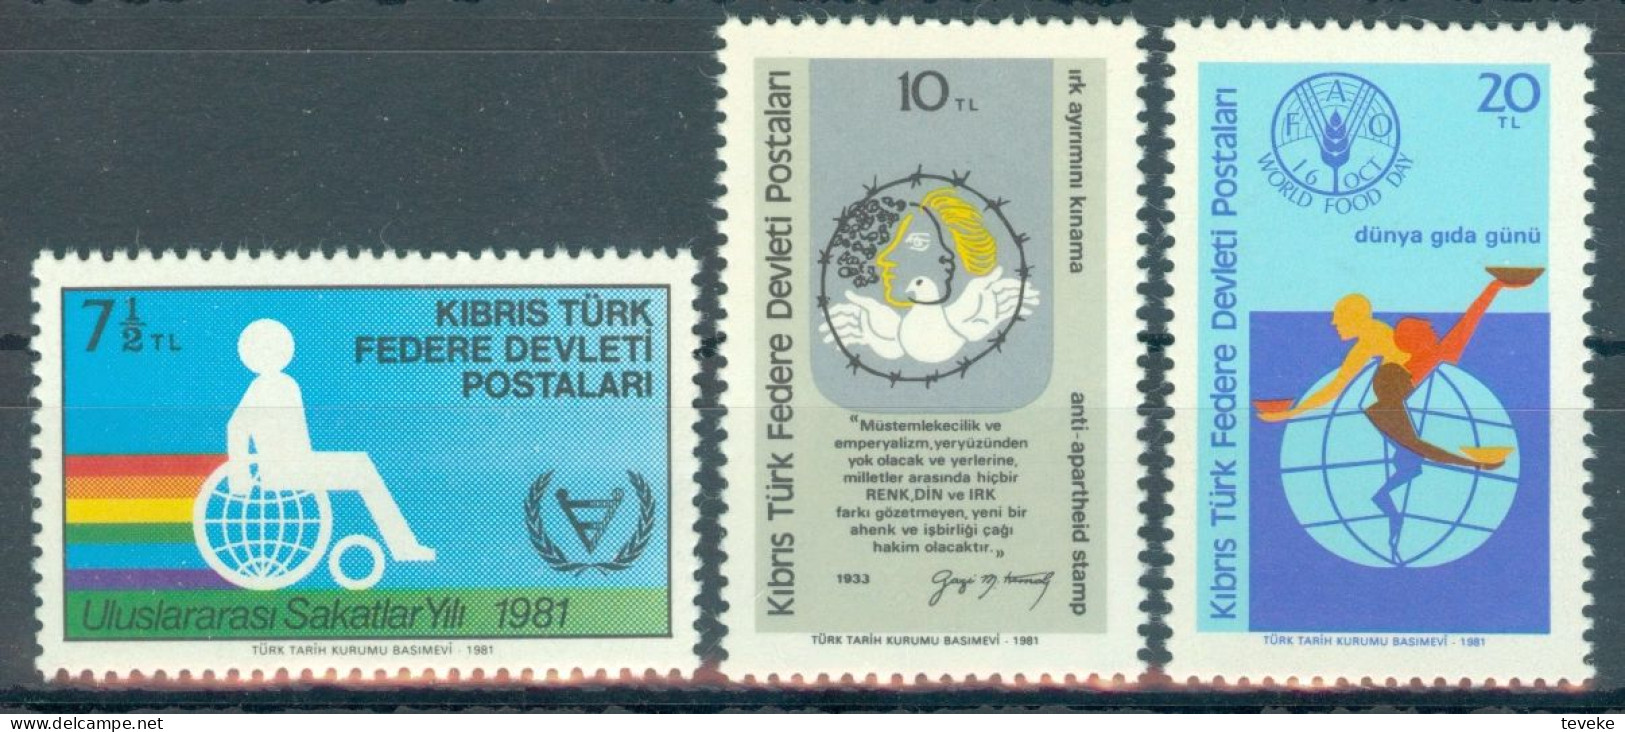 TURKISH CYPRUS 1981 - Michel Nr. 105/107 - MNH ** - Year Of The Disabled / Anti-Rasism / FAO - Neufs